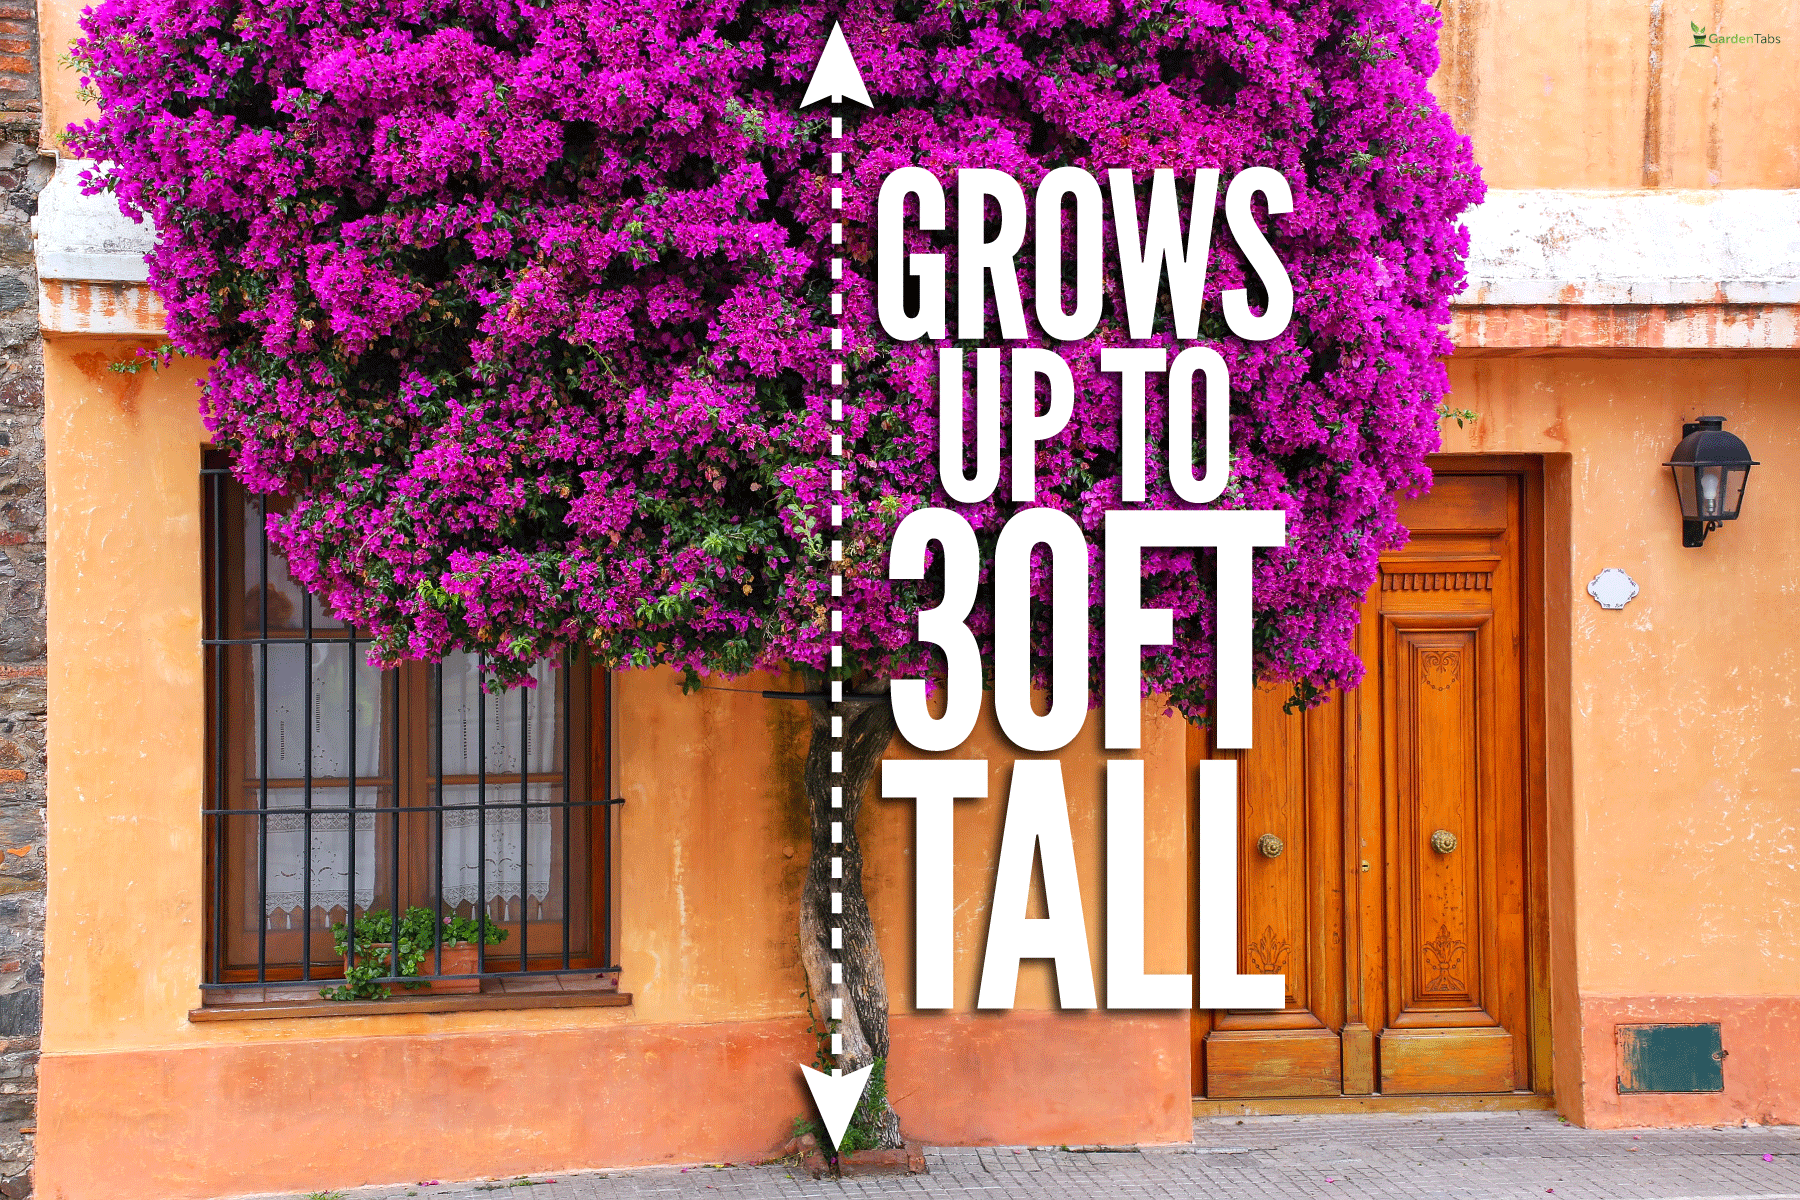 Bougainvillea tree growing by the house in historic quarter of Colonia del Sacramento, How To Keep Bougainvillea Small